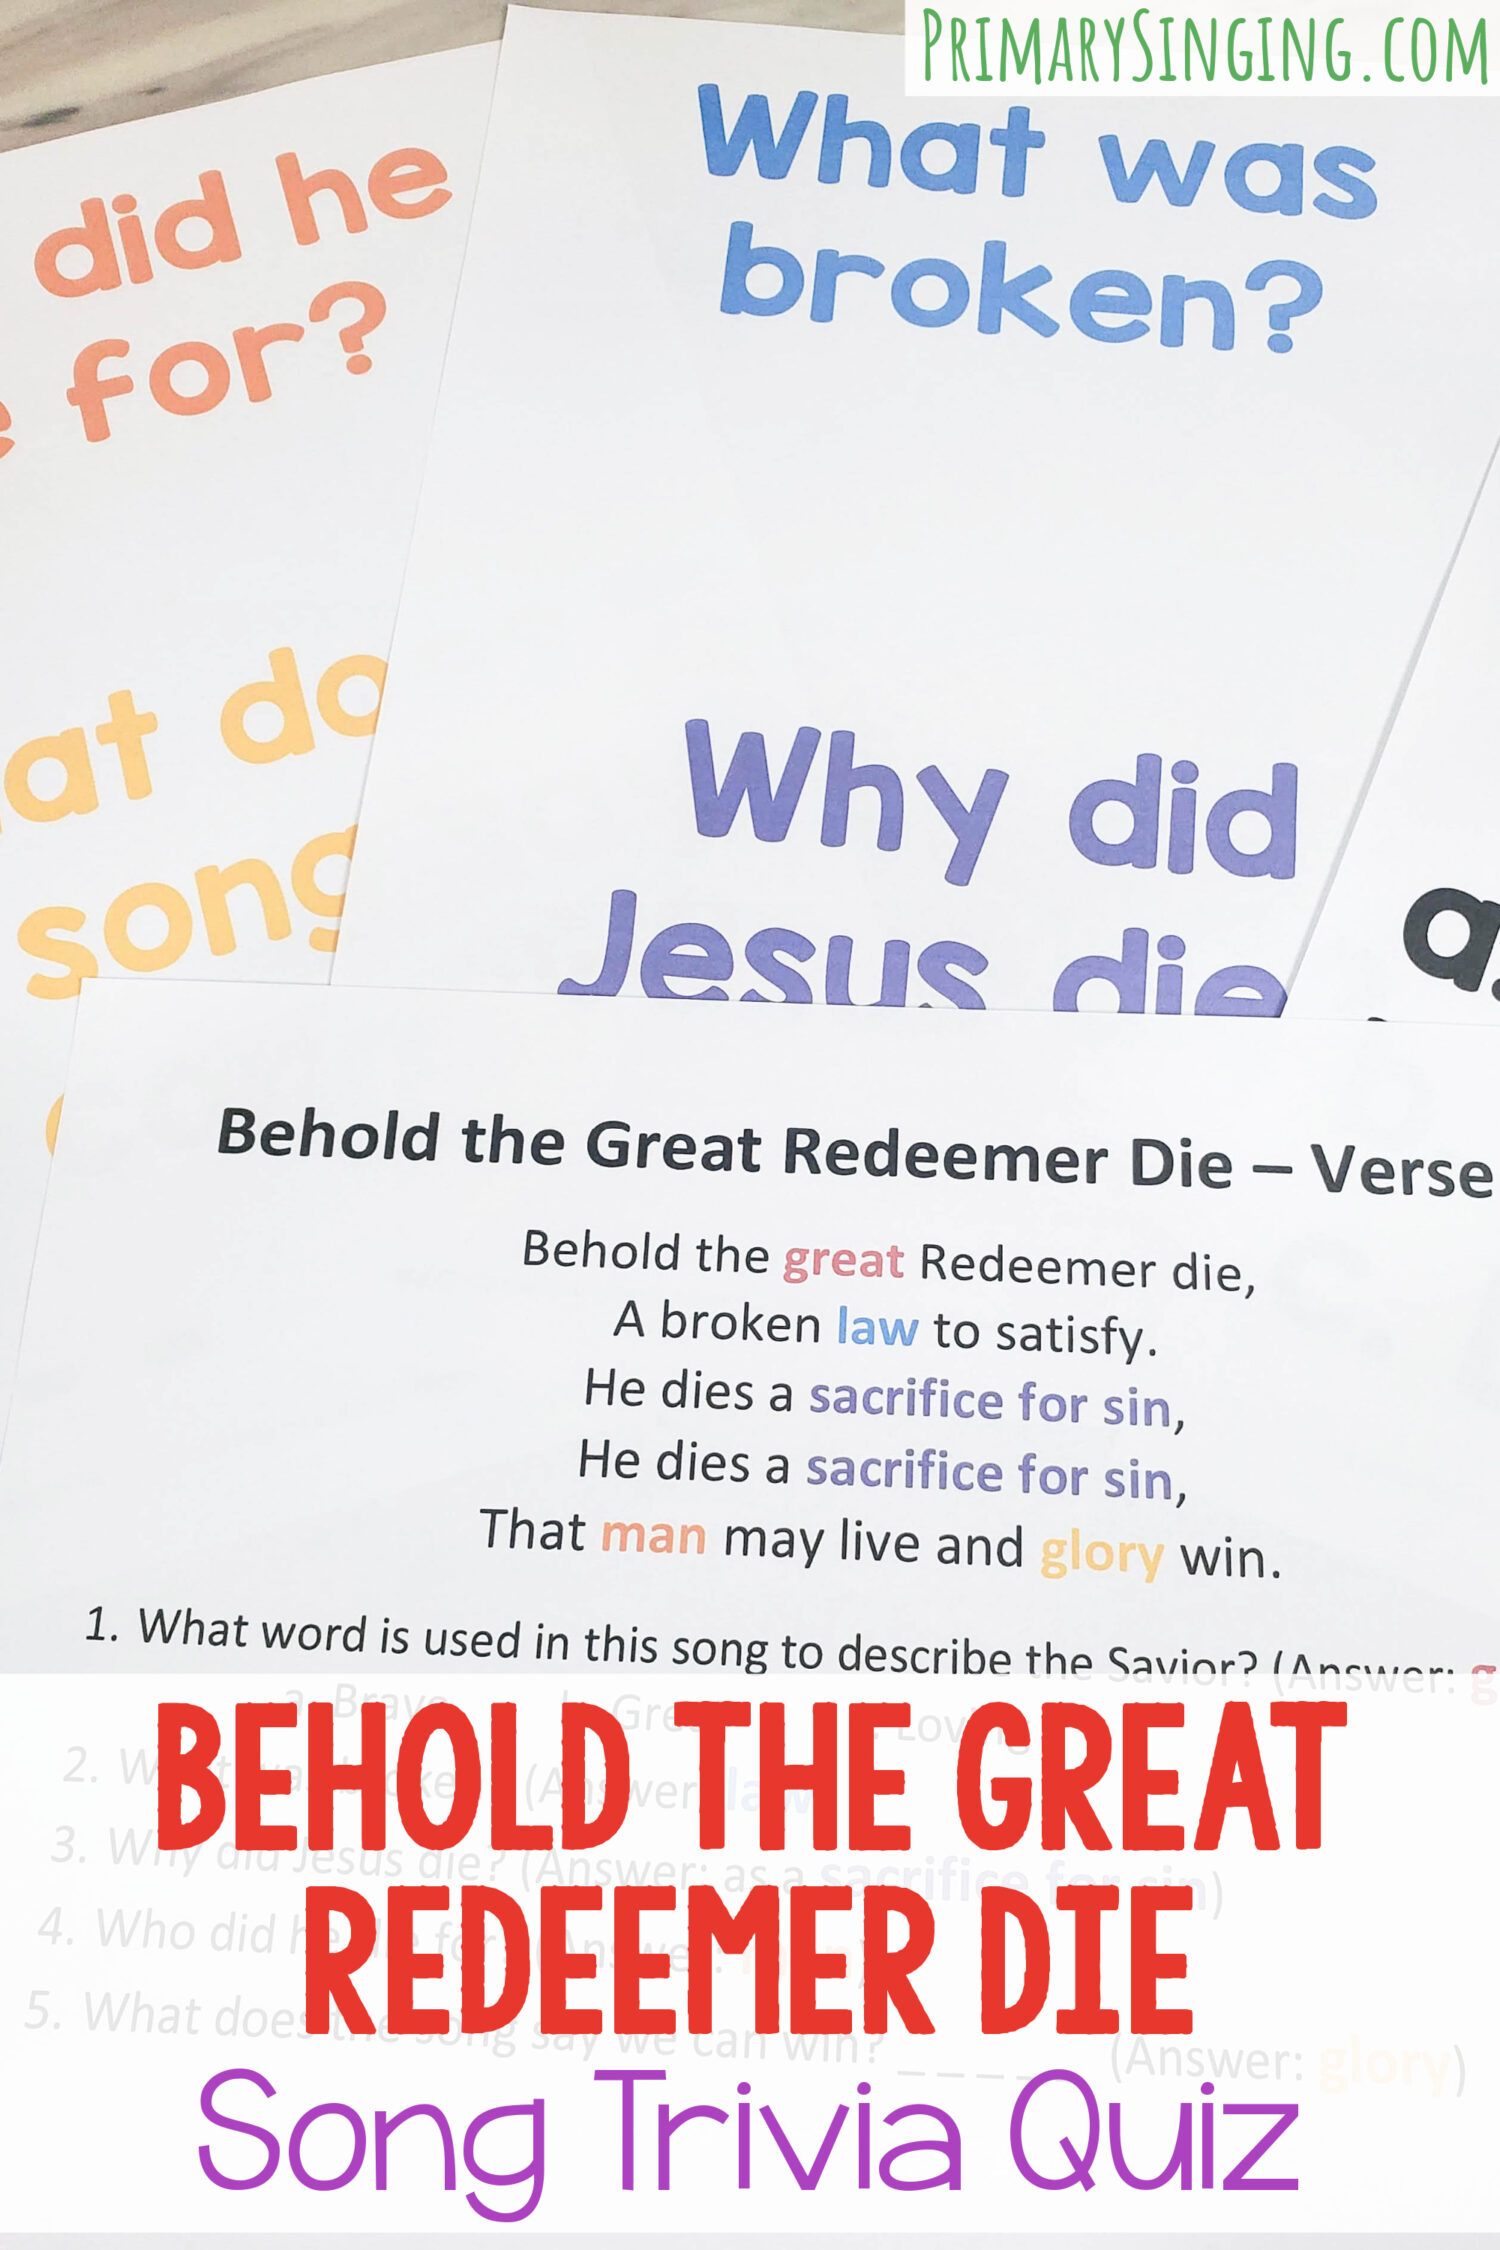 Behold the Great Redeemer Die Lyrics Trivia Quiz - ask questions from the song lyrics to help the kids better understand the meaning of the verse in a fun and interactive way! Includes printable helps for LDS Primary music leaders.